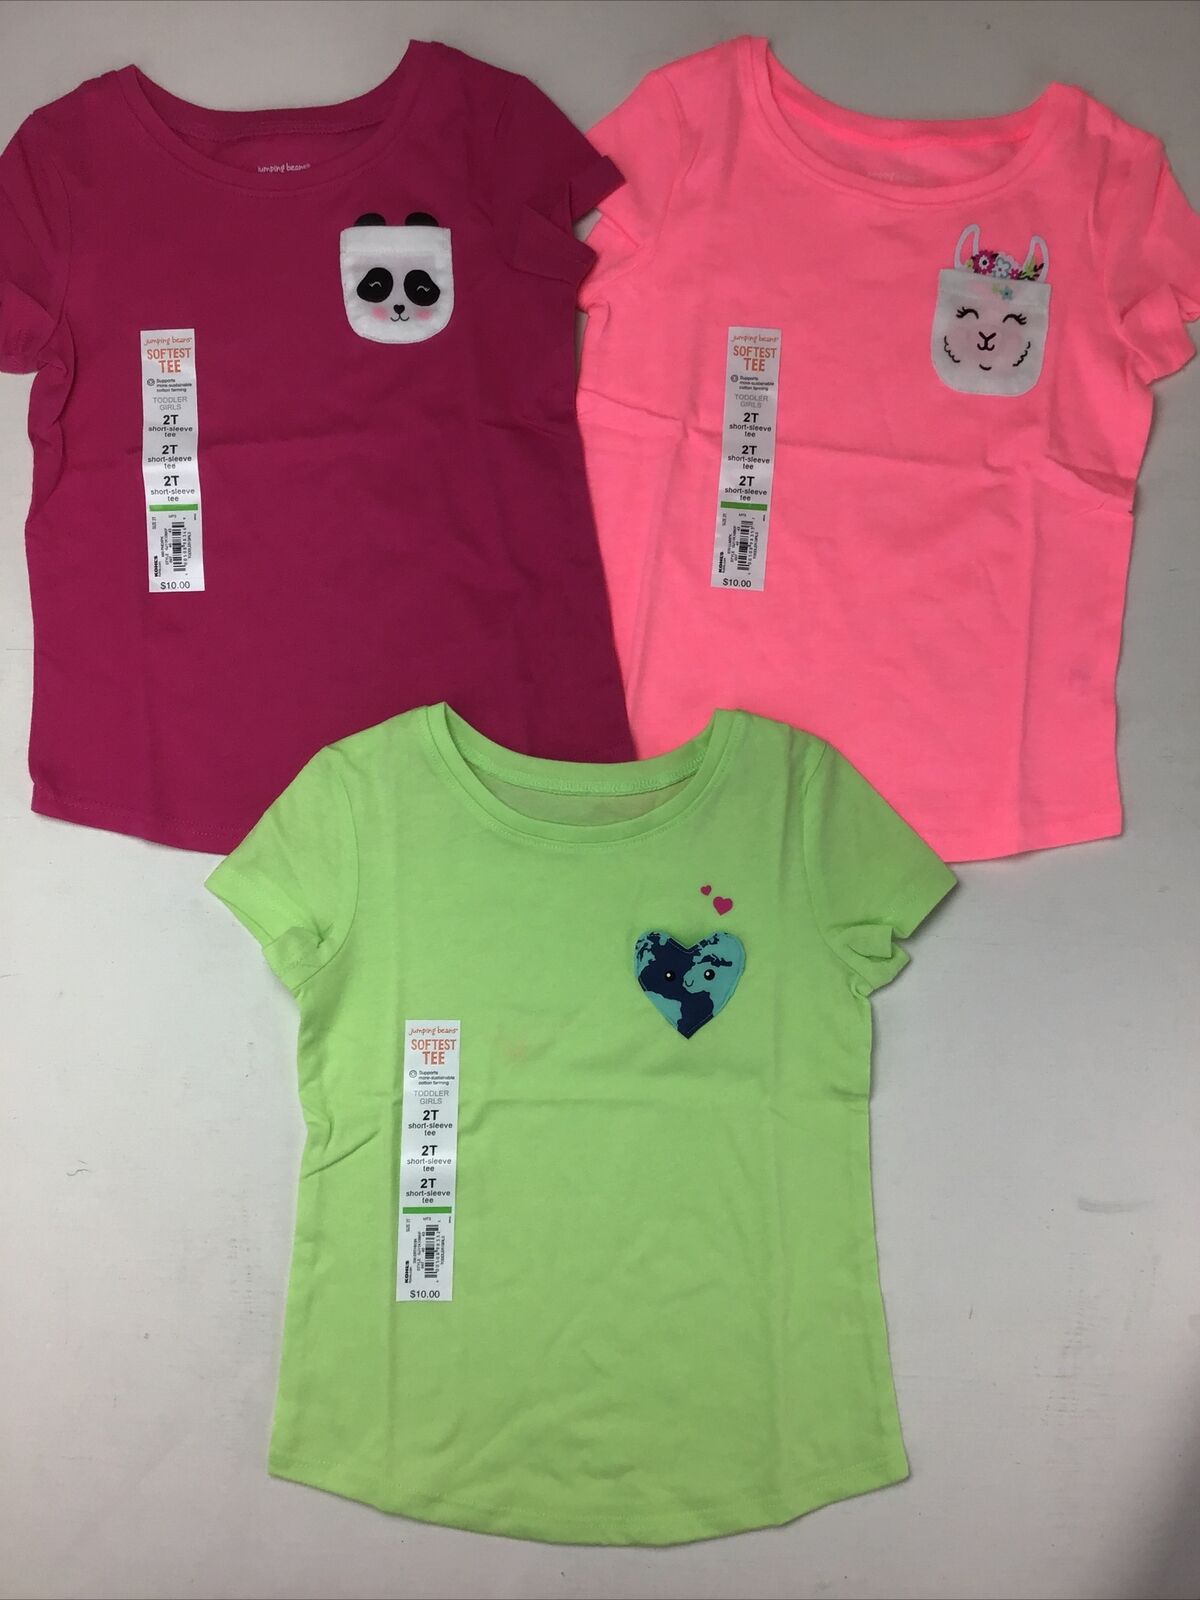 Lot Of 3 Girls Summer T-shirts Soft. Llama Portland Mall 2T. Size Clearance SALE! Limited time! Super Ear